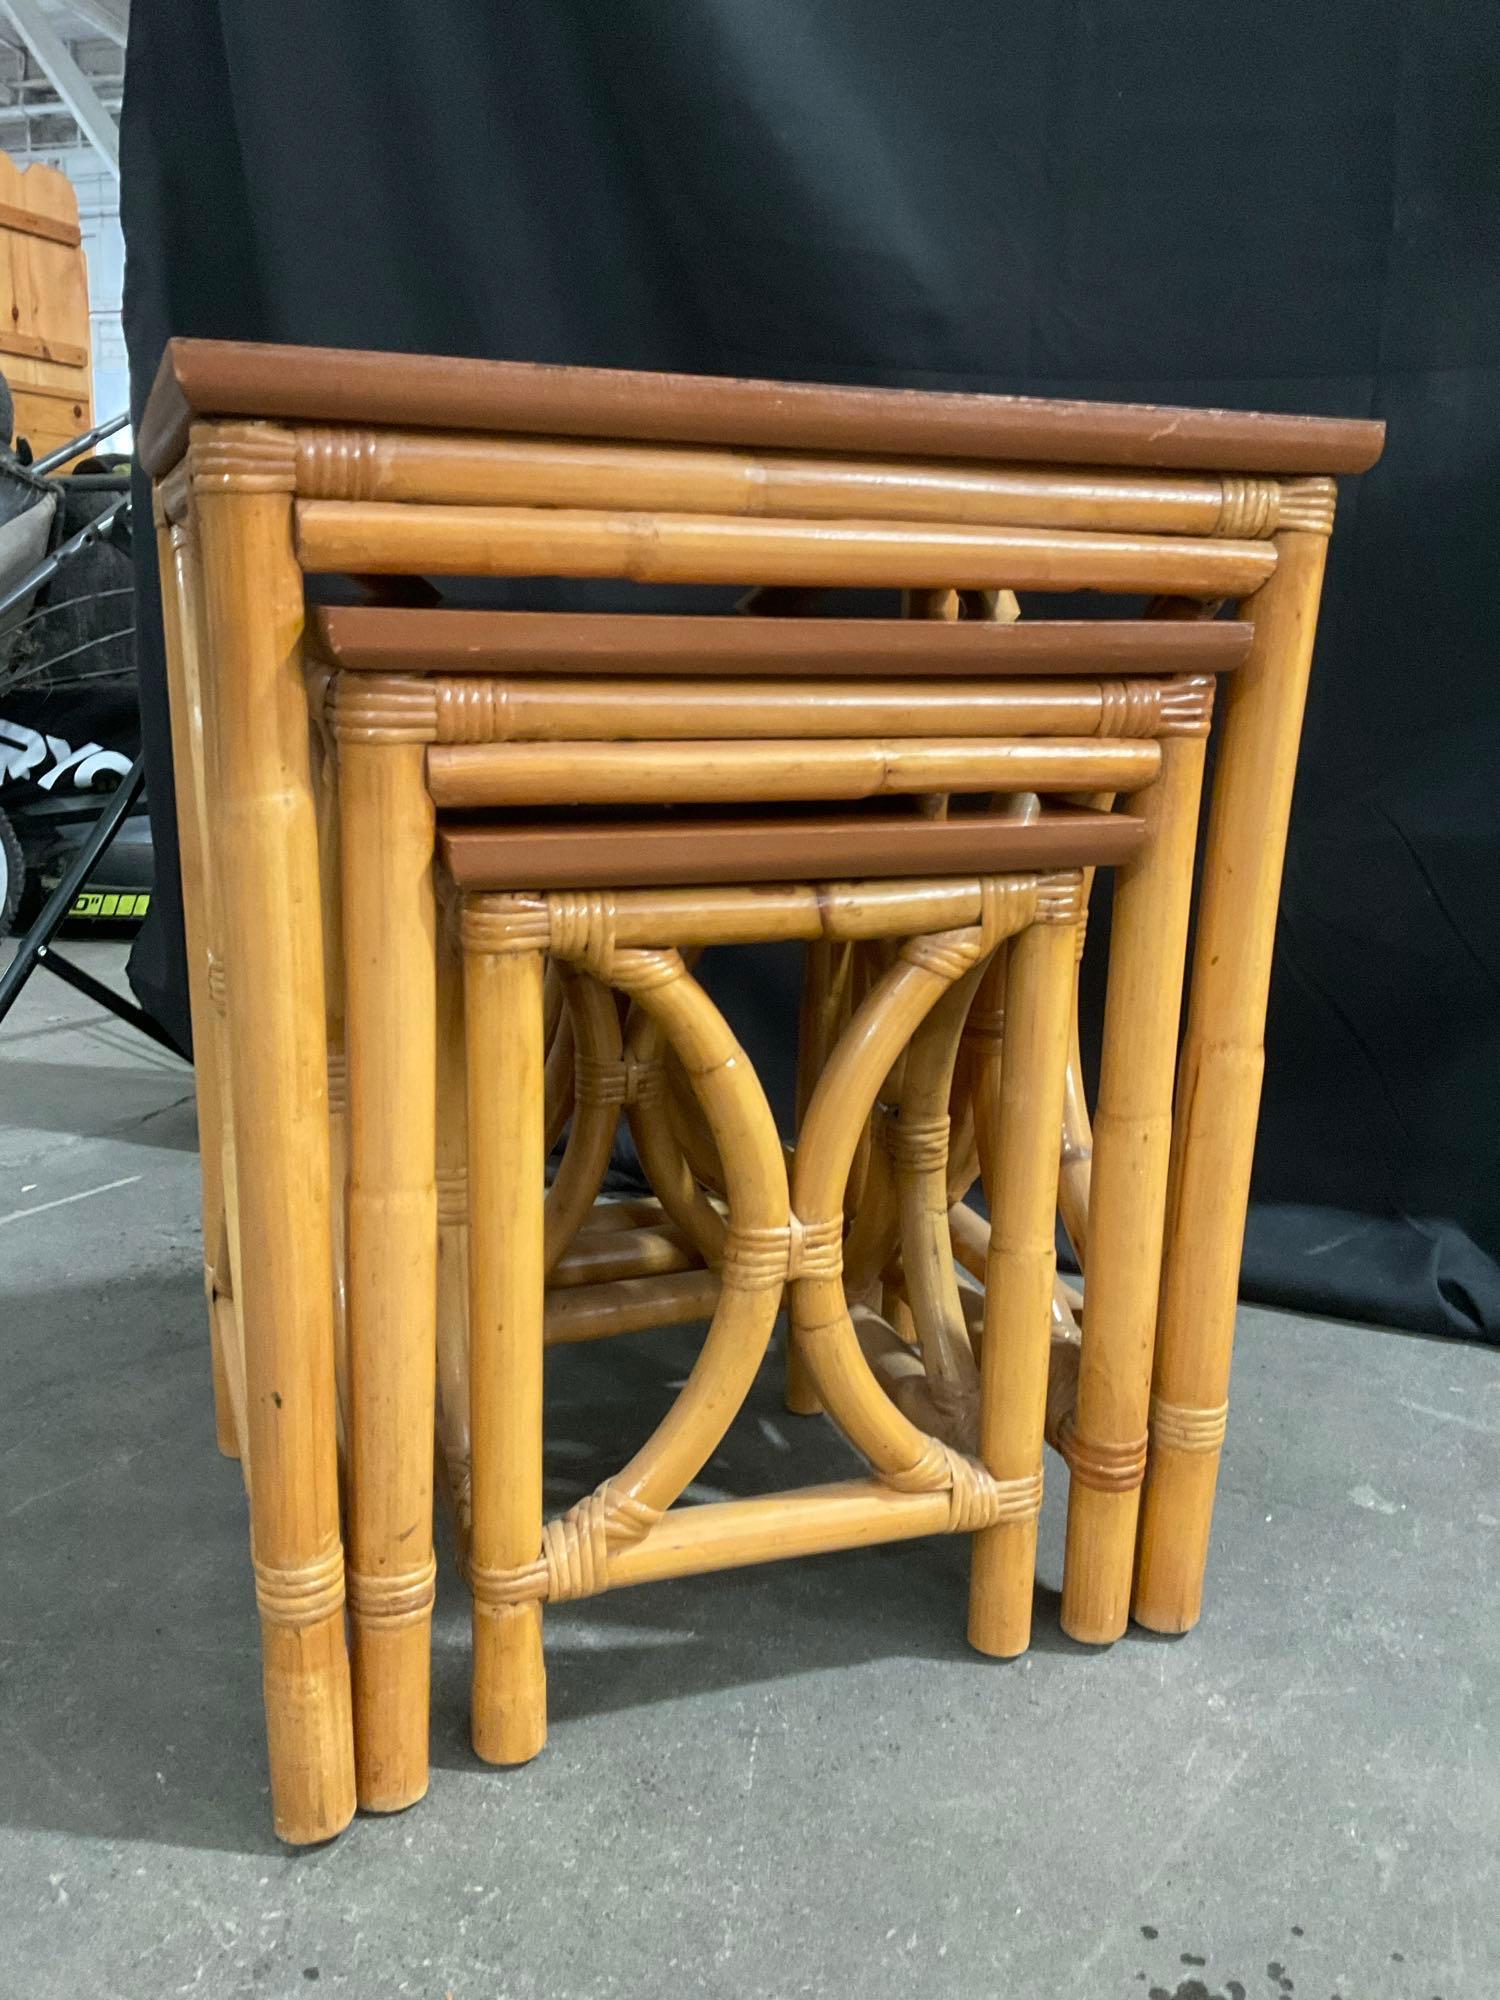 Gorgeous Mid Century Rattan 3 pc Stacking End Tables - See pics!